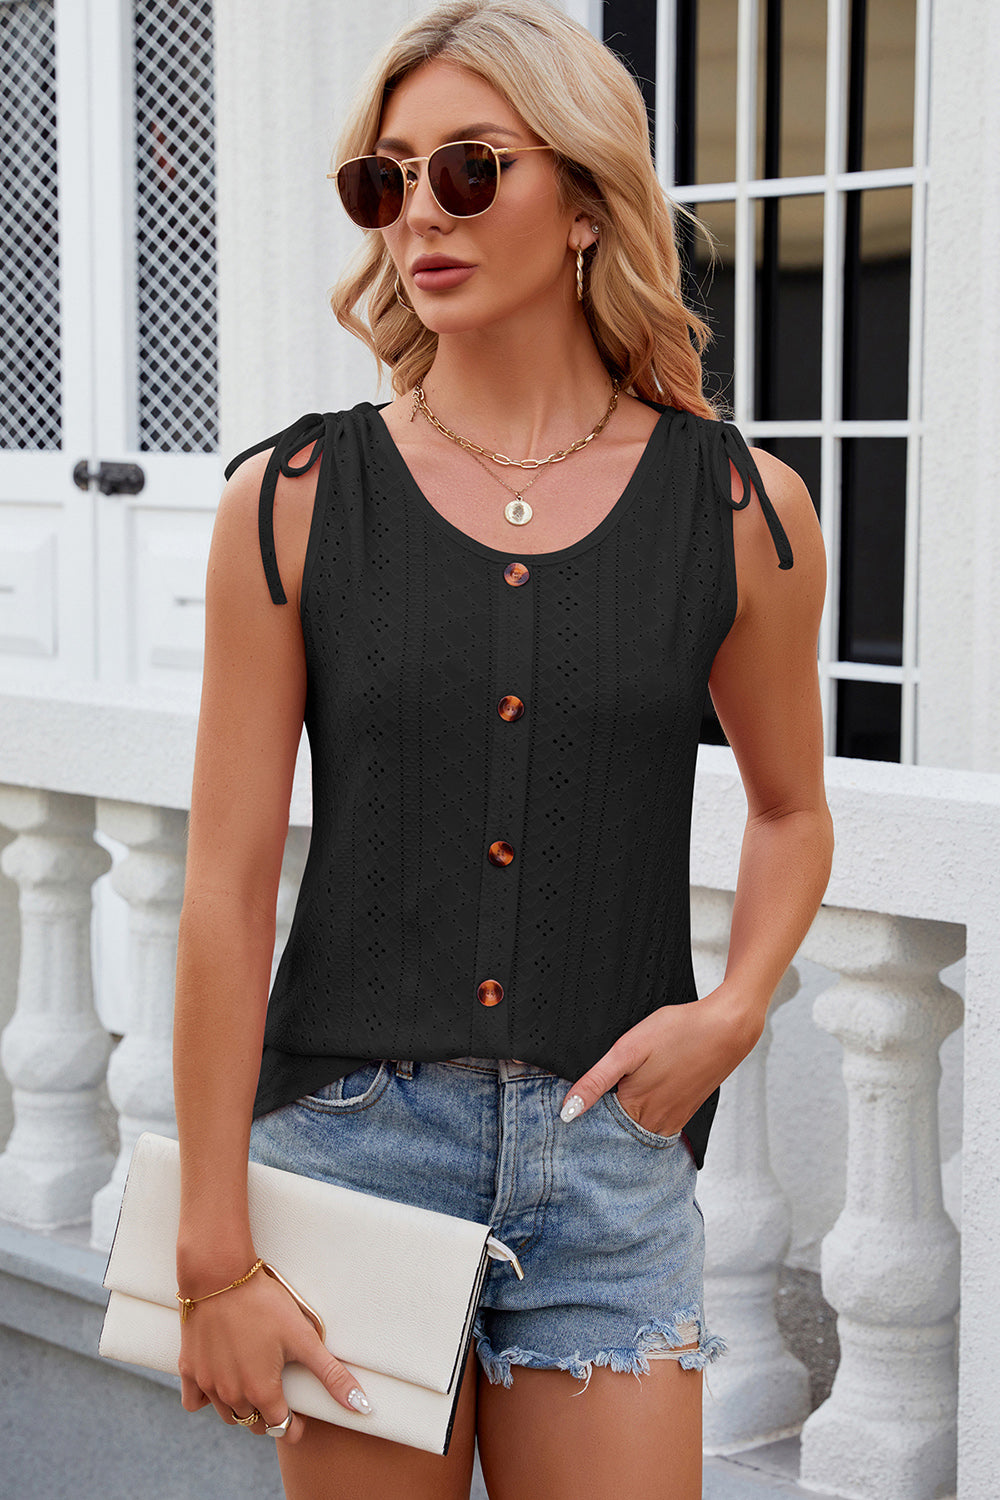 Discover elegance with our Eyelet Tank! A round neck, wide straps, and breathable fabric offer style and comfort for any occasion. Shop now!